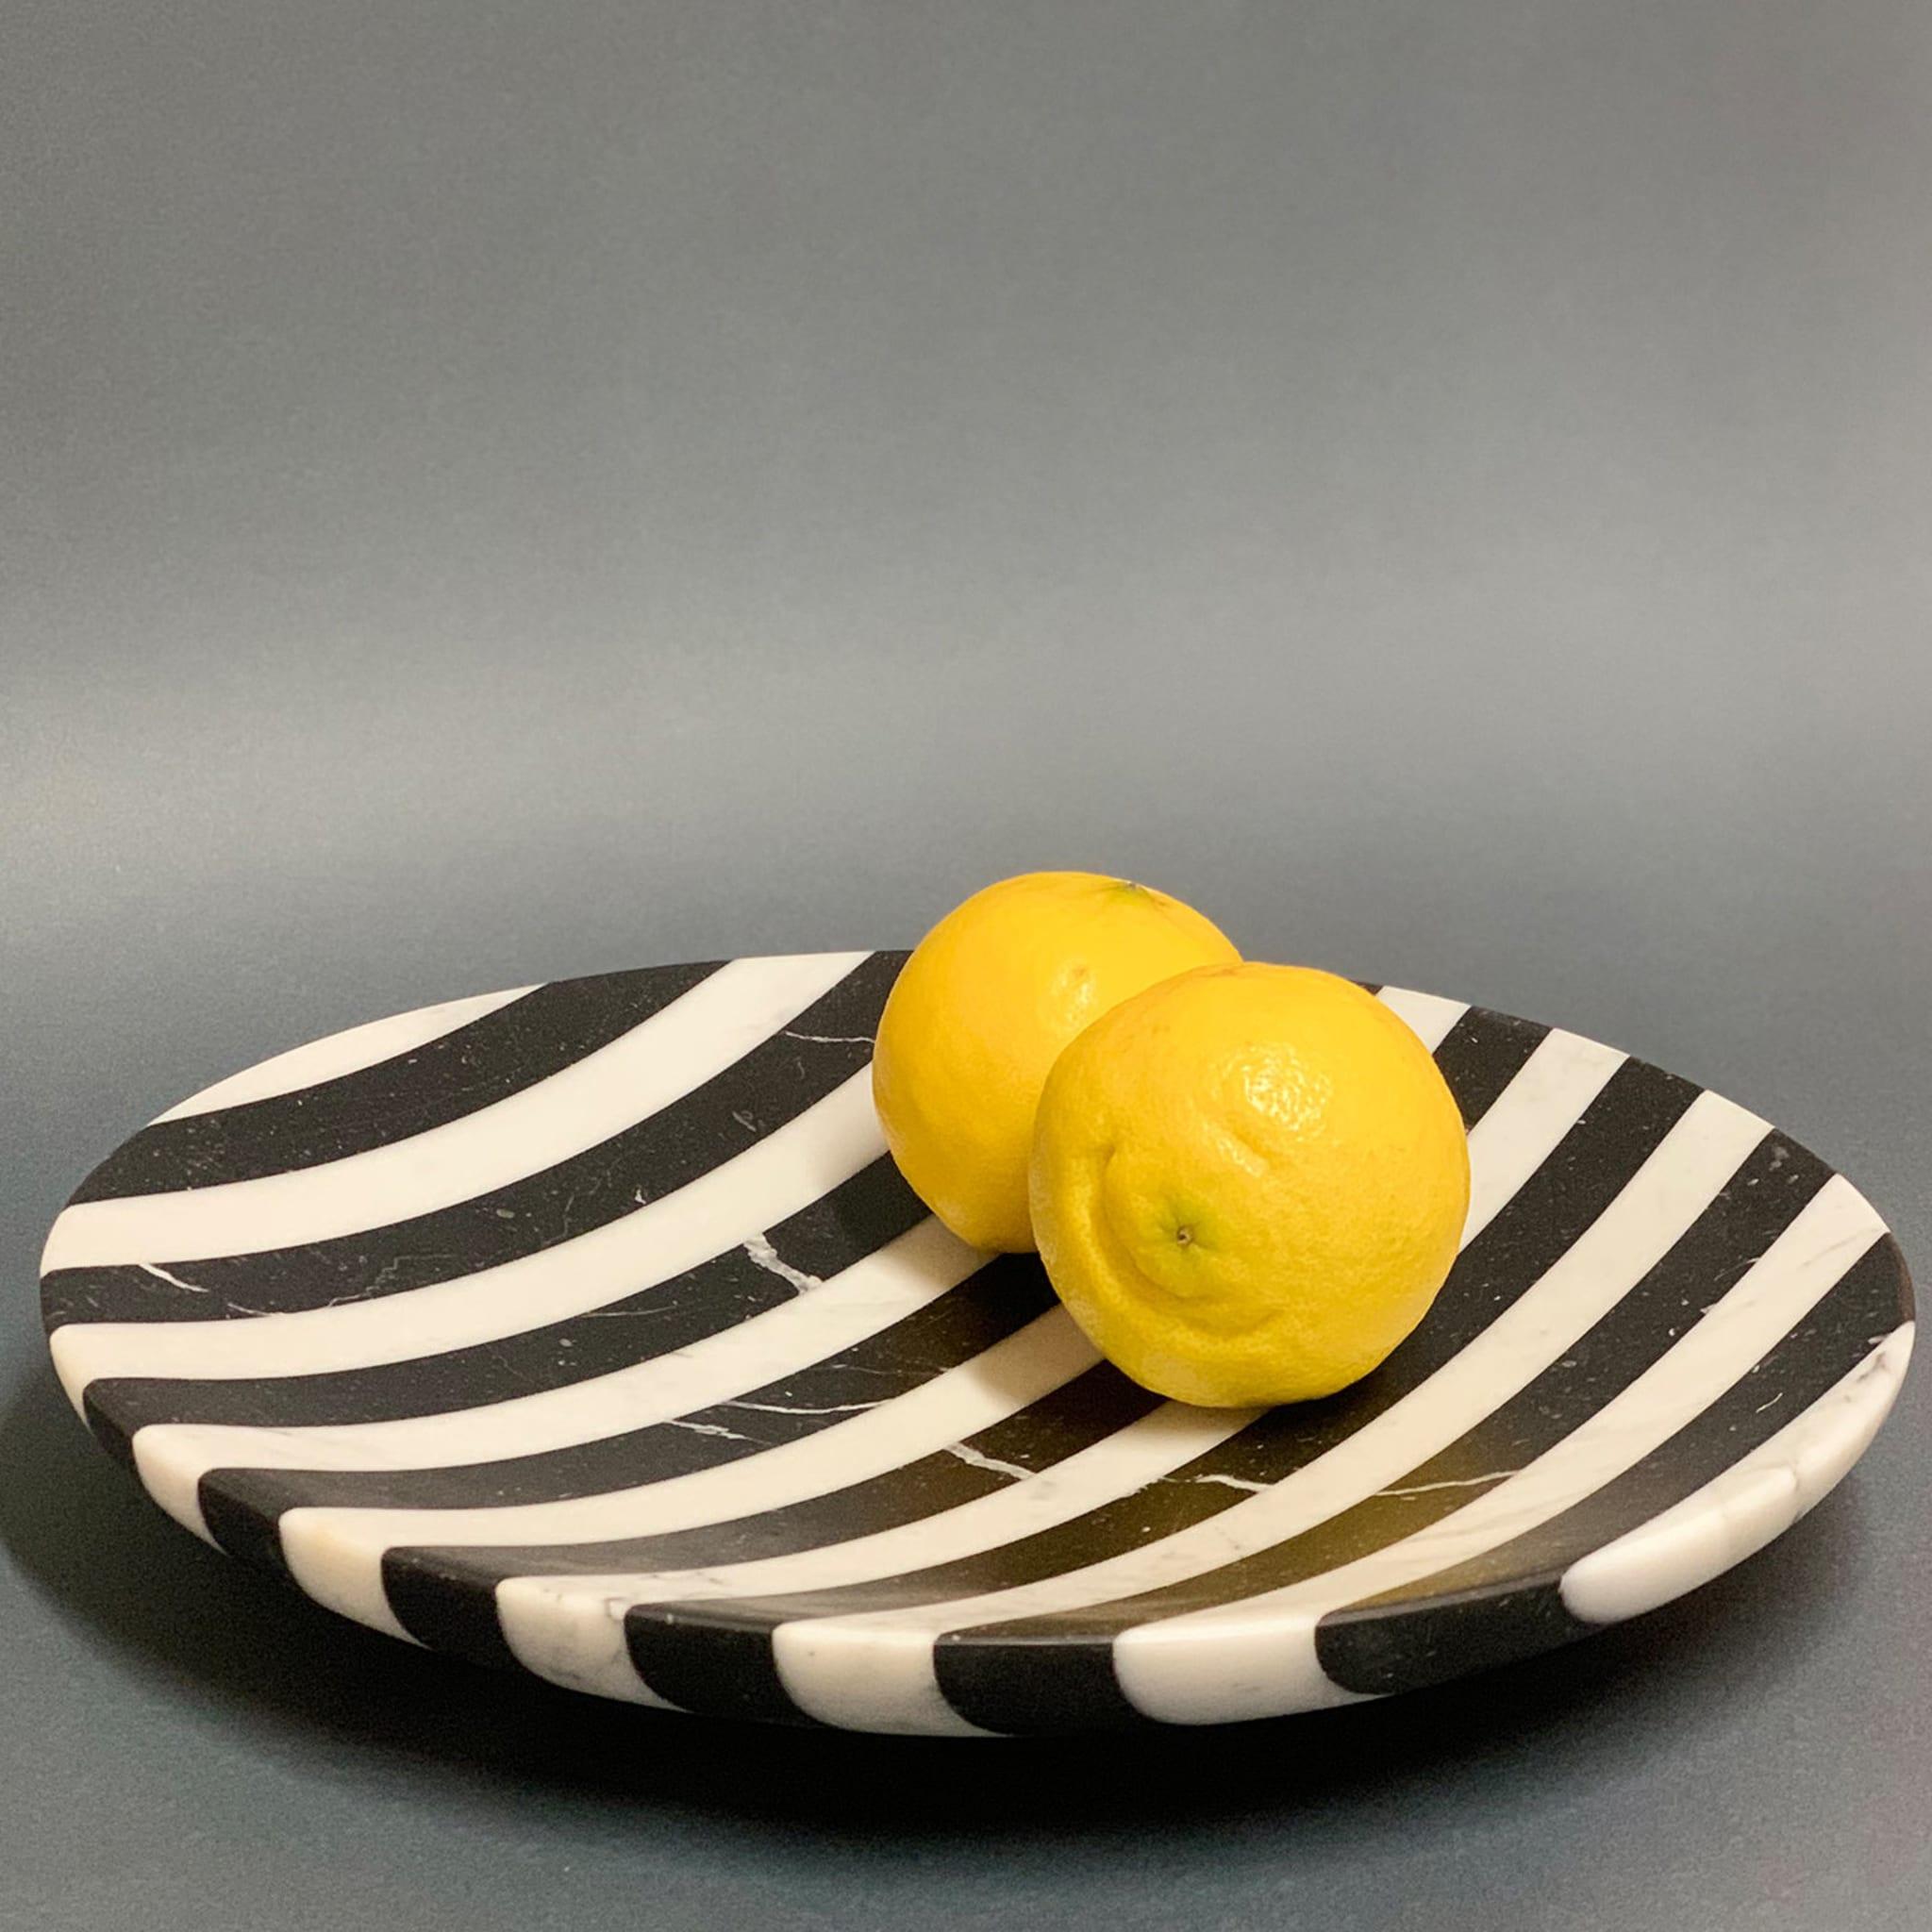 Designed by Welsh artist Bethan Gray for Editions Milano, this refined low bowl epitomizes minimalist aesthetic balance and exceptional handcraftsmanship. The low profile and delicately sloping interior are enhanced by the striped pattern created by